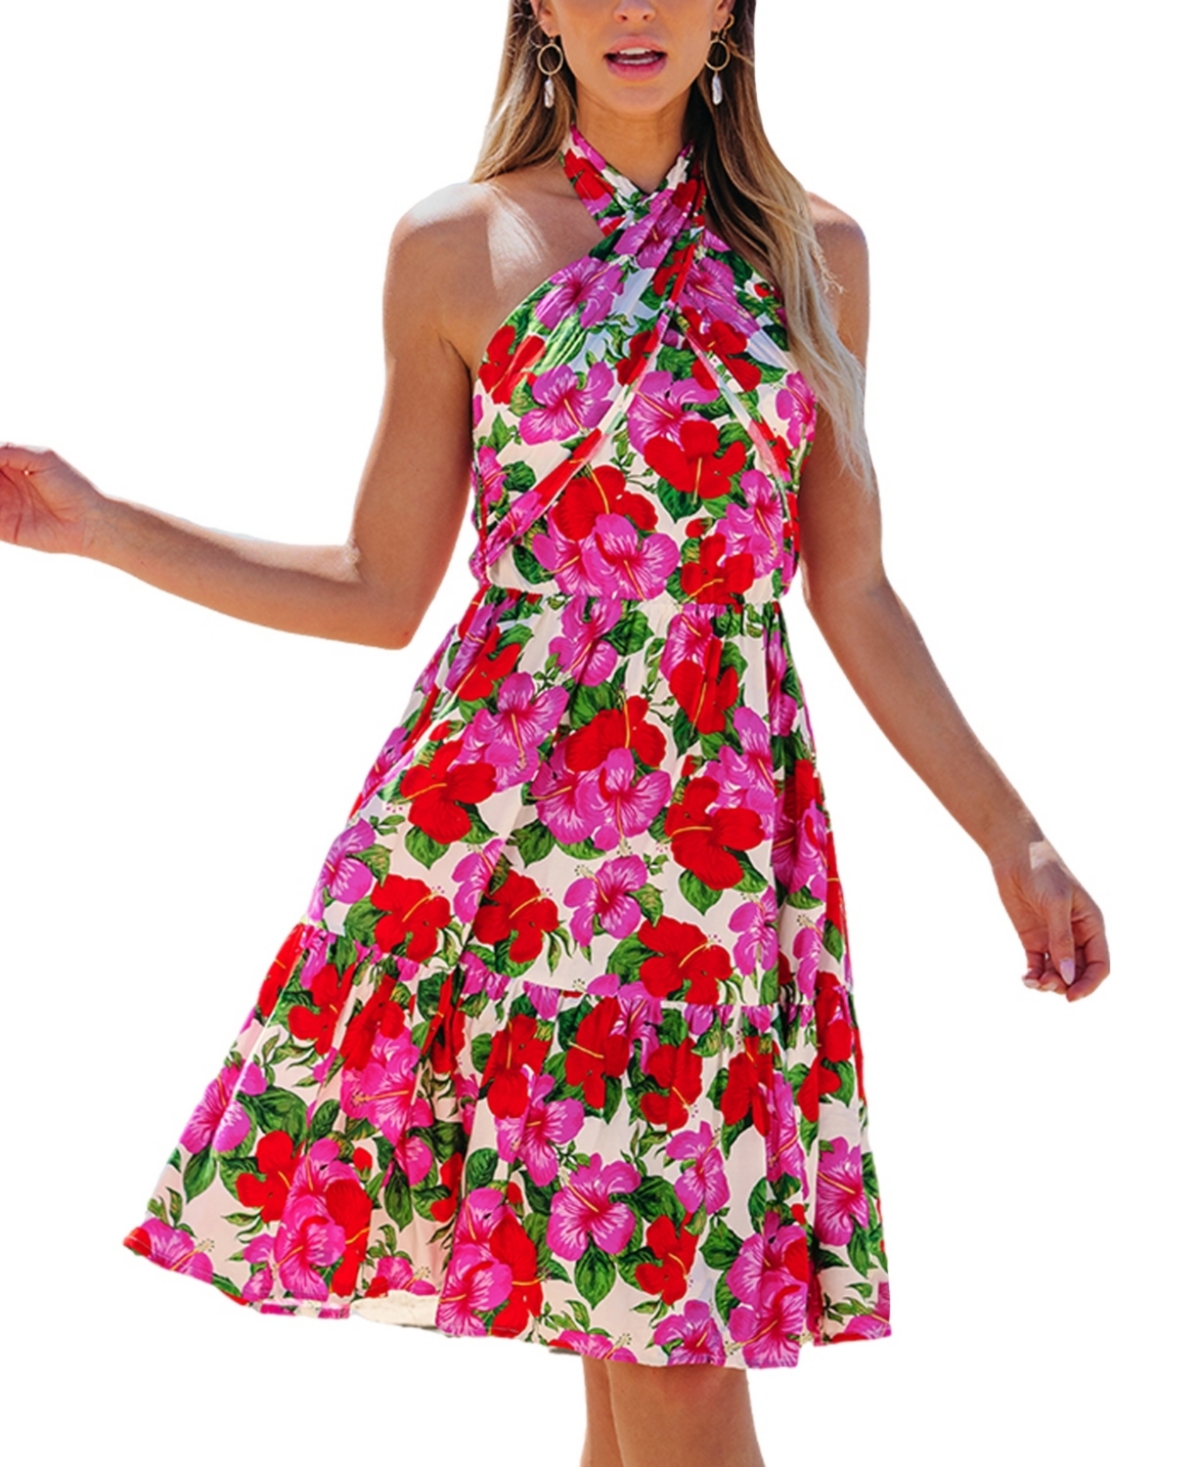 Women's Pink & Red Floral Crossover Halterneck Mini Beach Dress - Pink